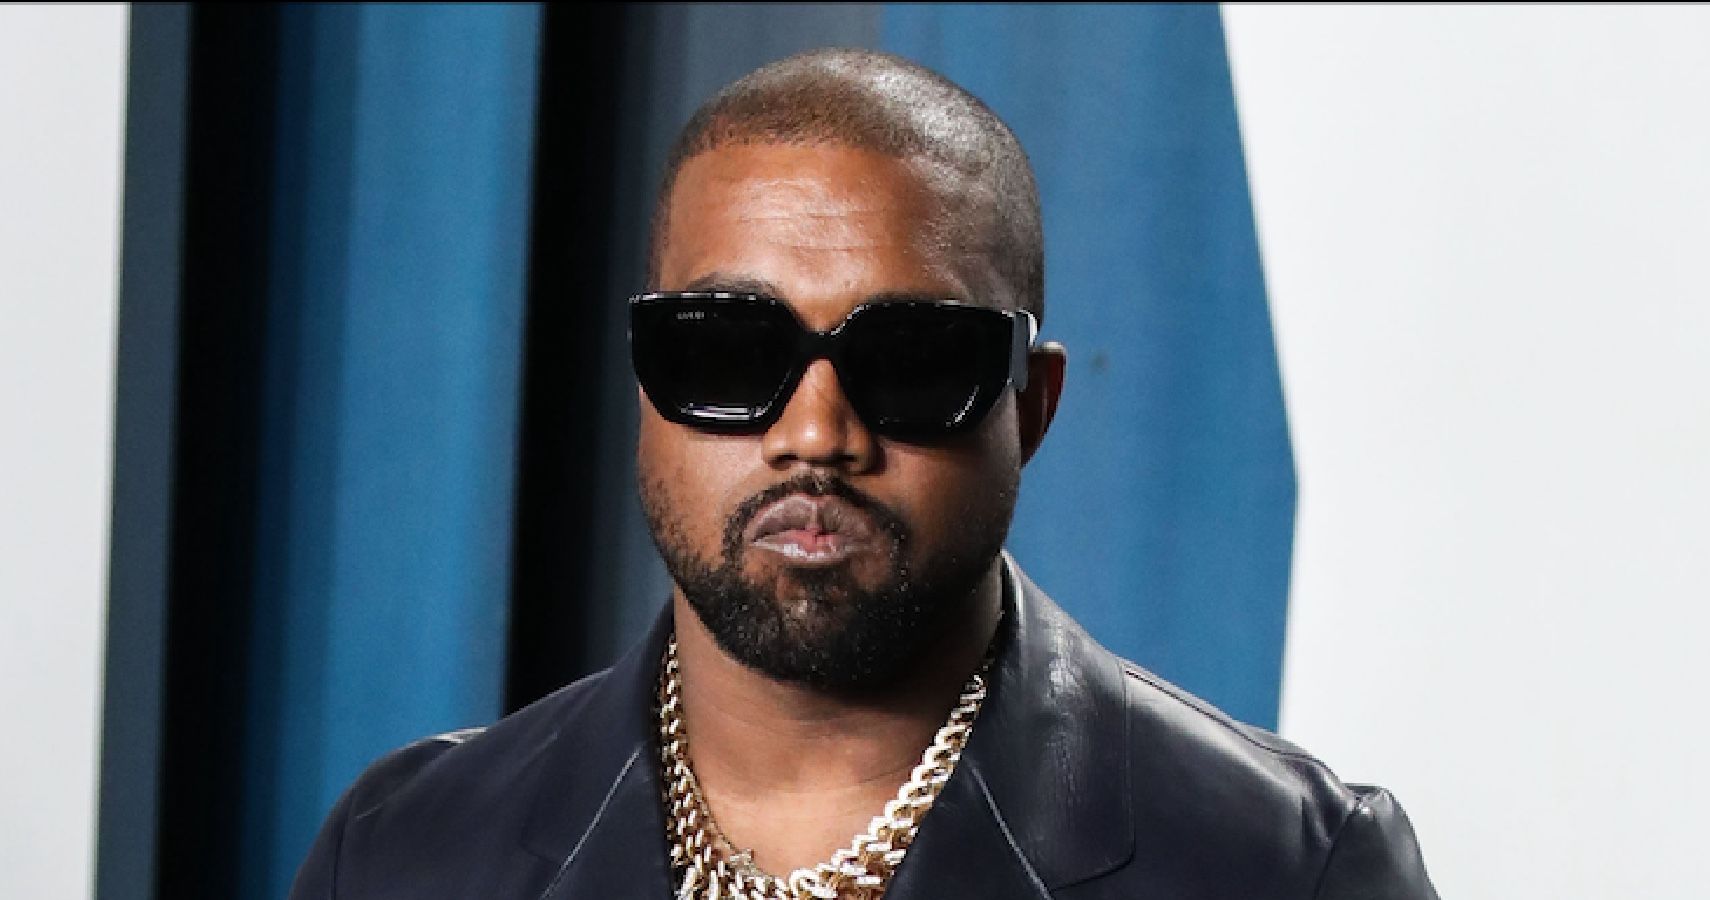 Kanye West wearing sunglasses on the red carpet 